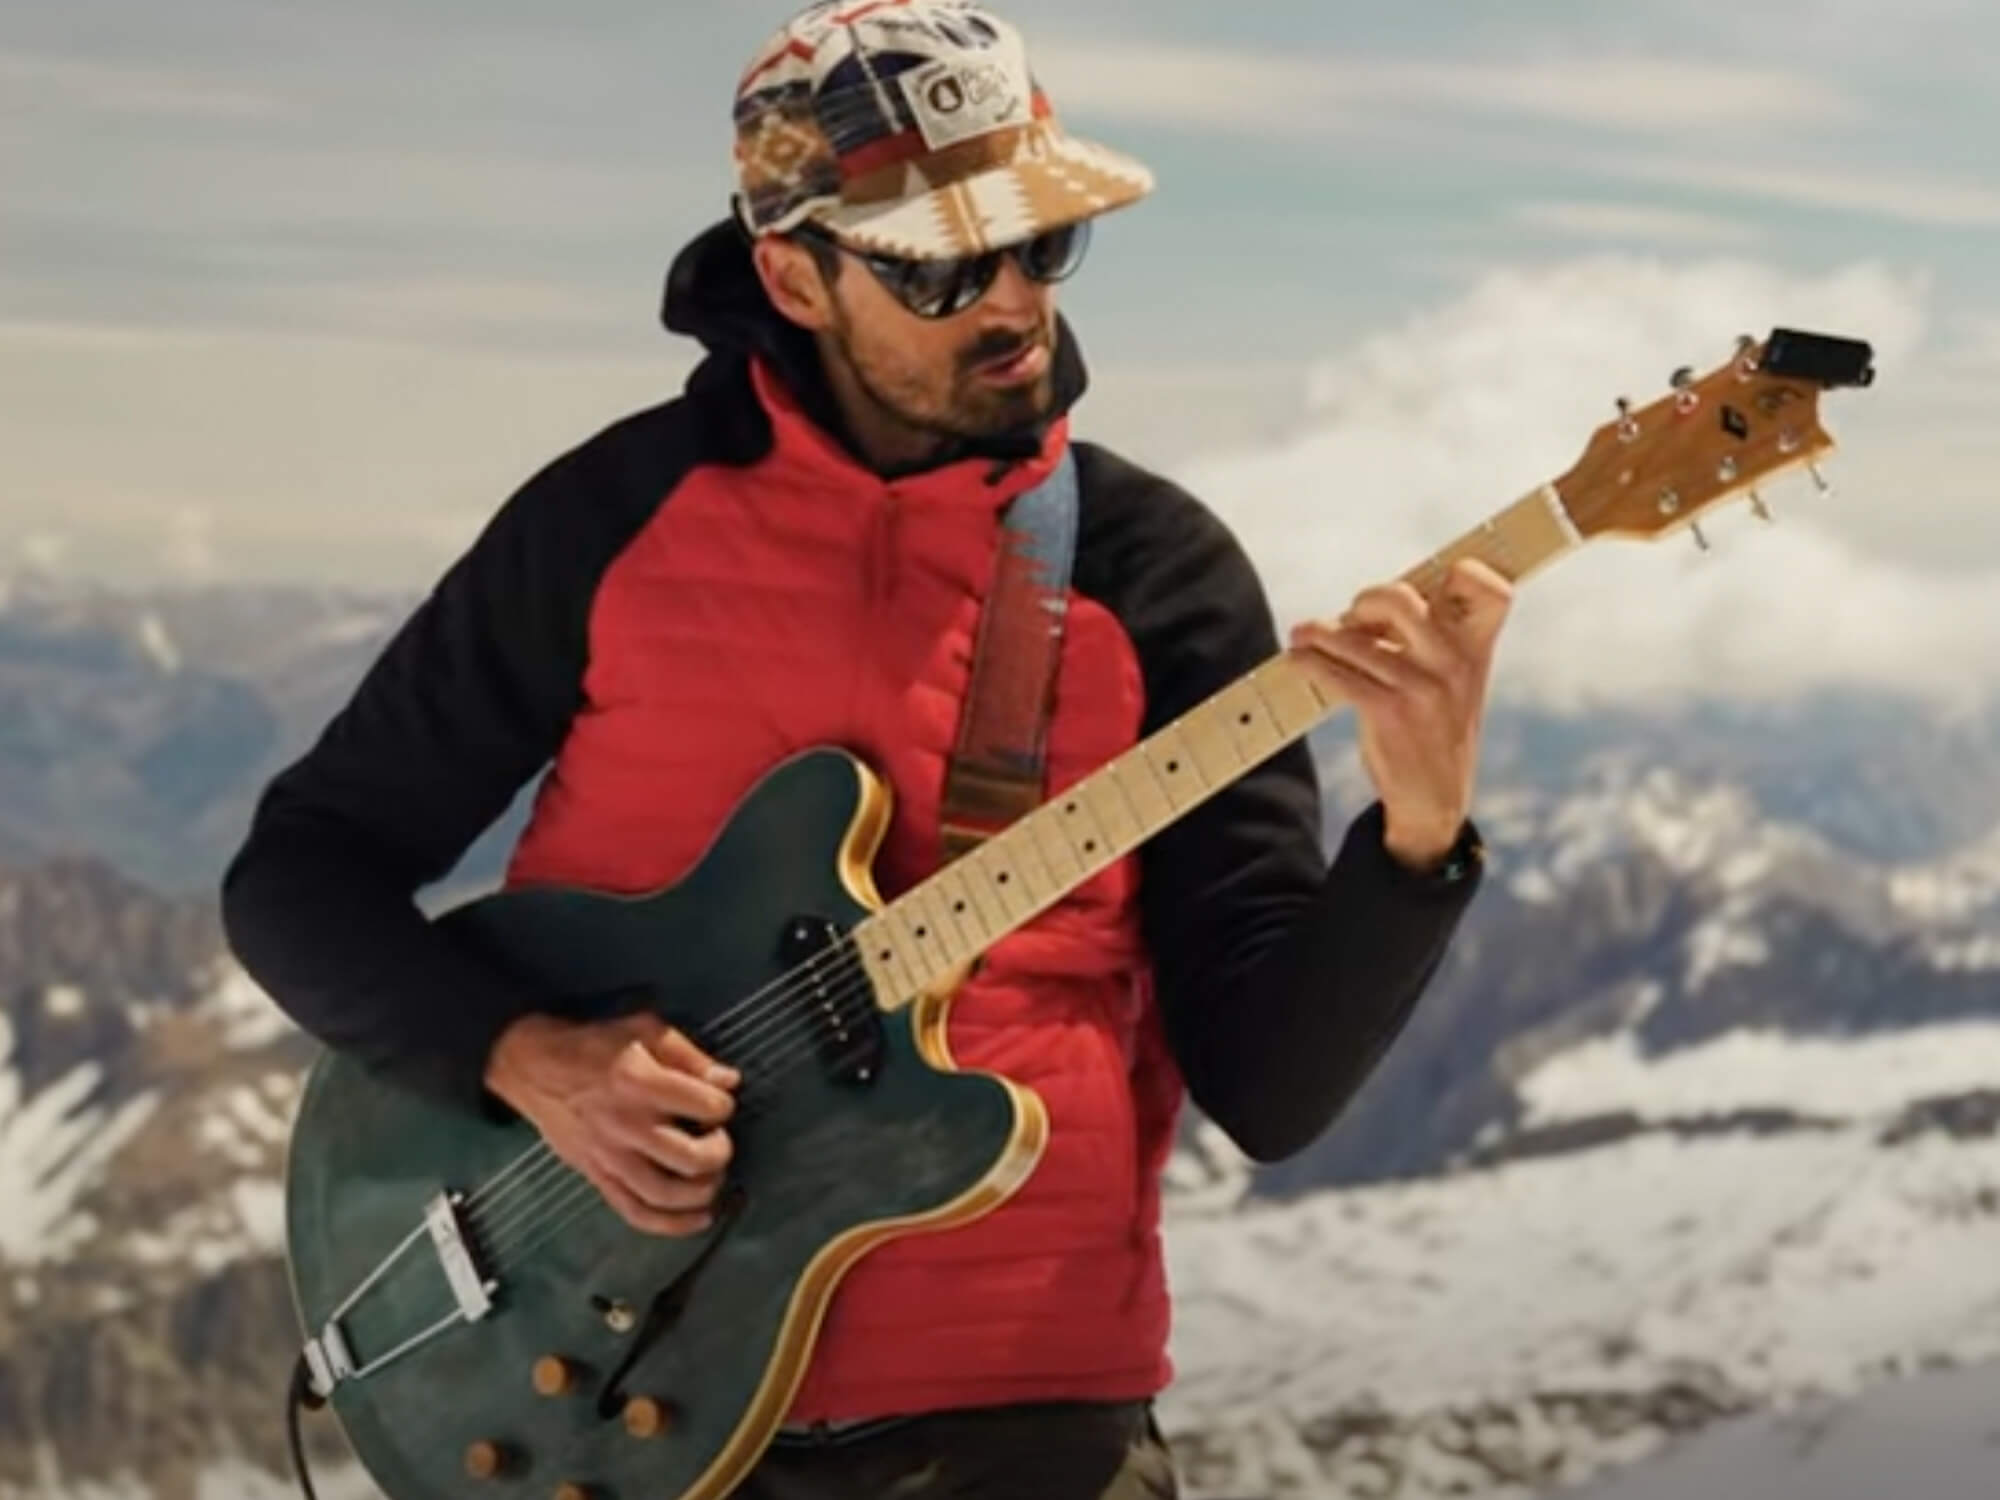 Lopez performing his original song on a blue custom semi-hollow guitar. He's wearing a red coat and the mountain range is behind him.